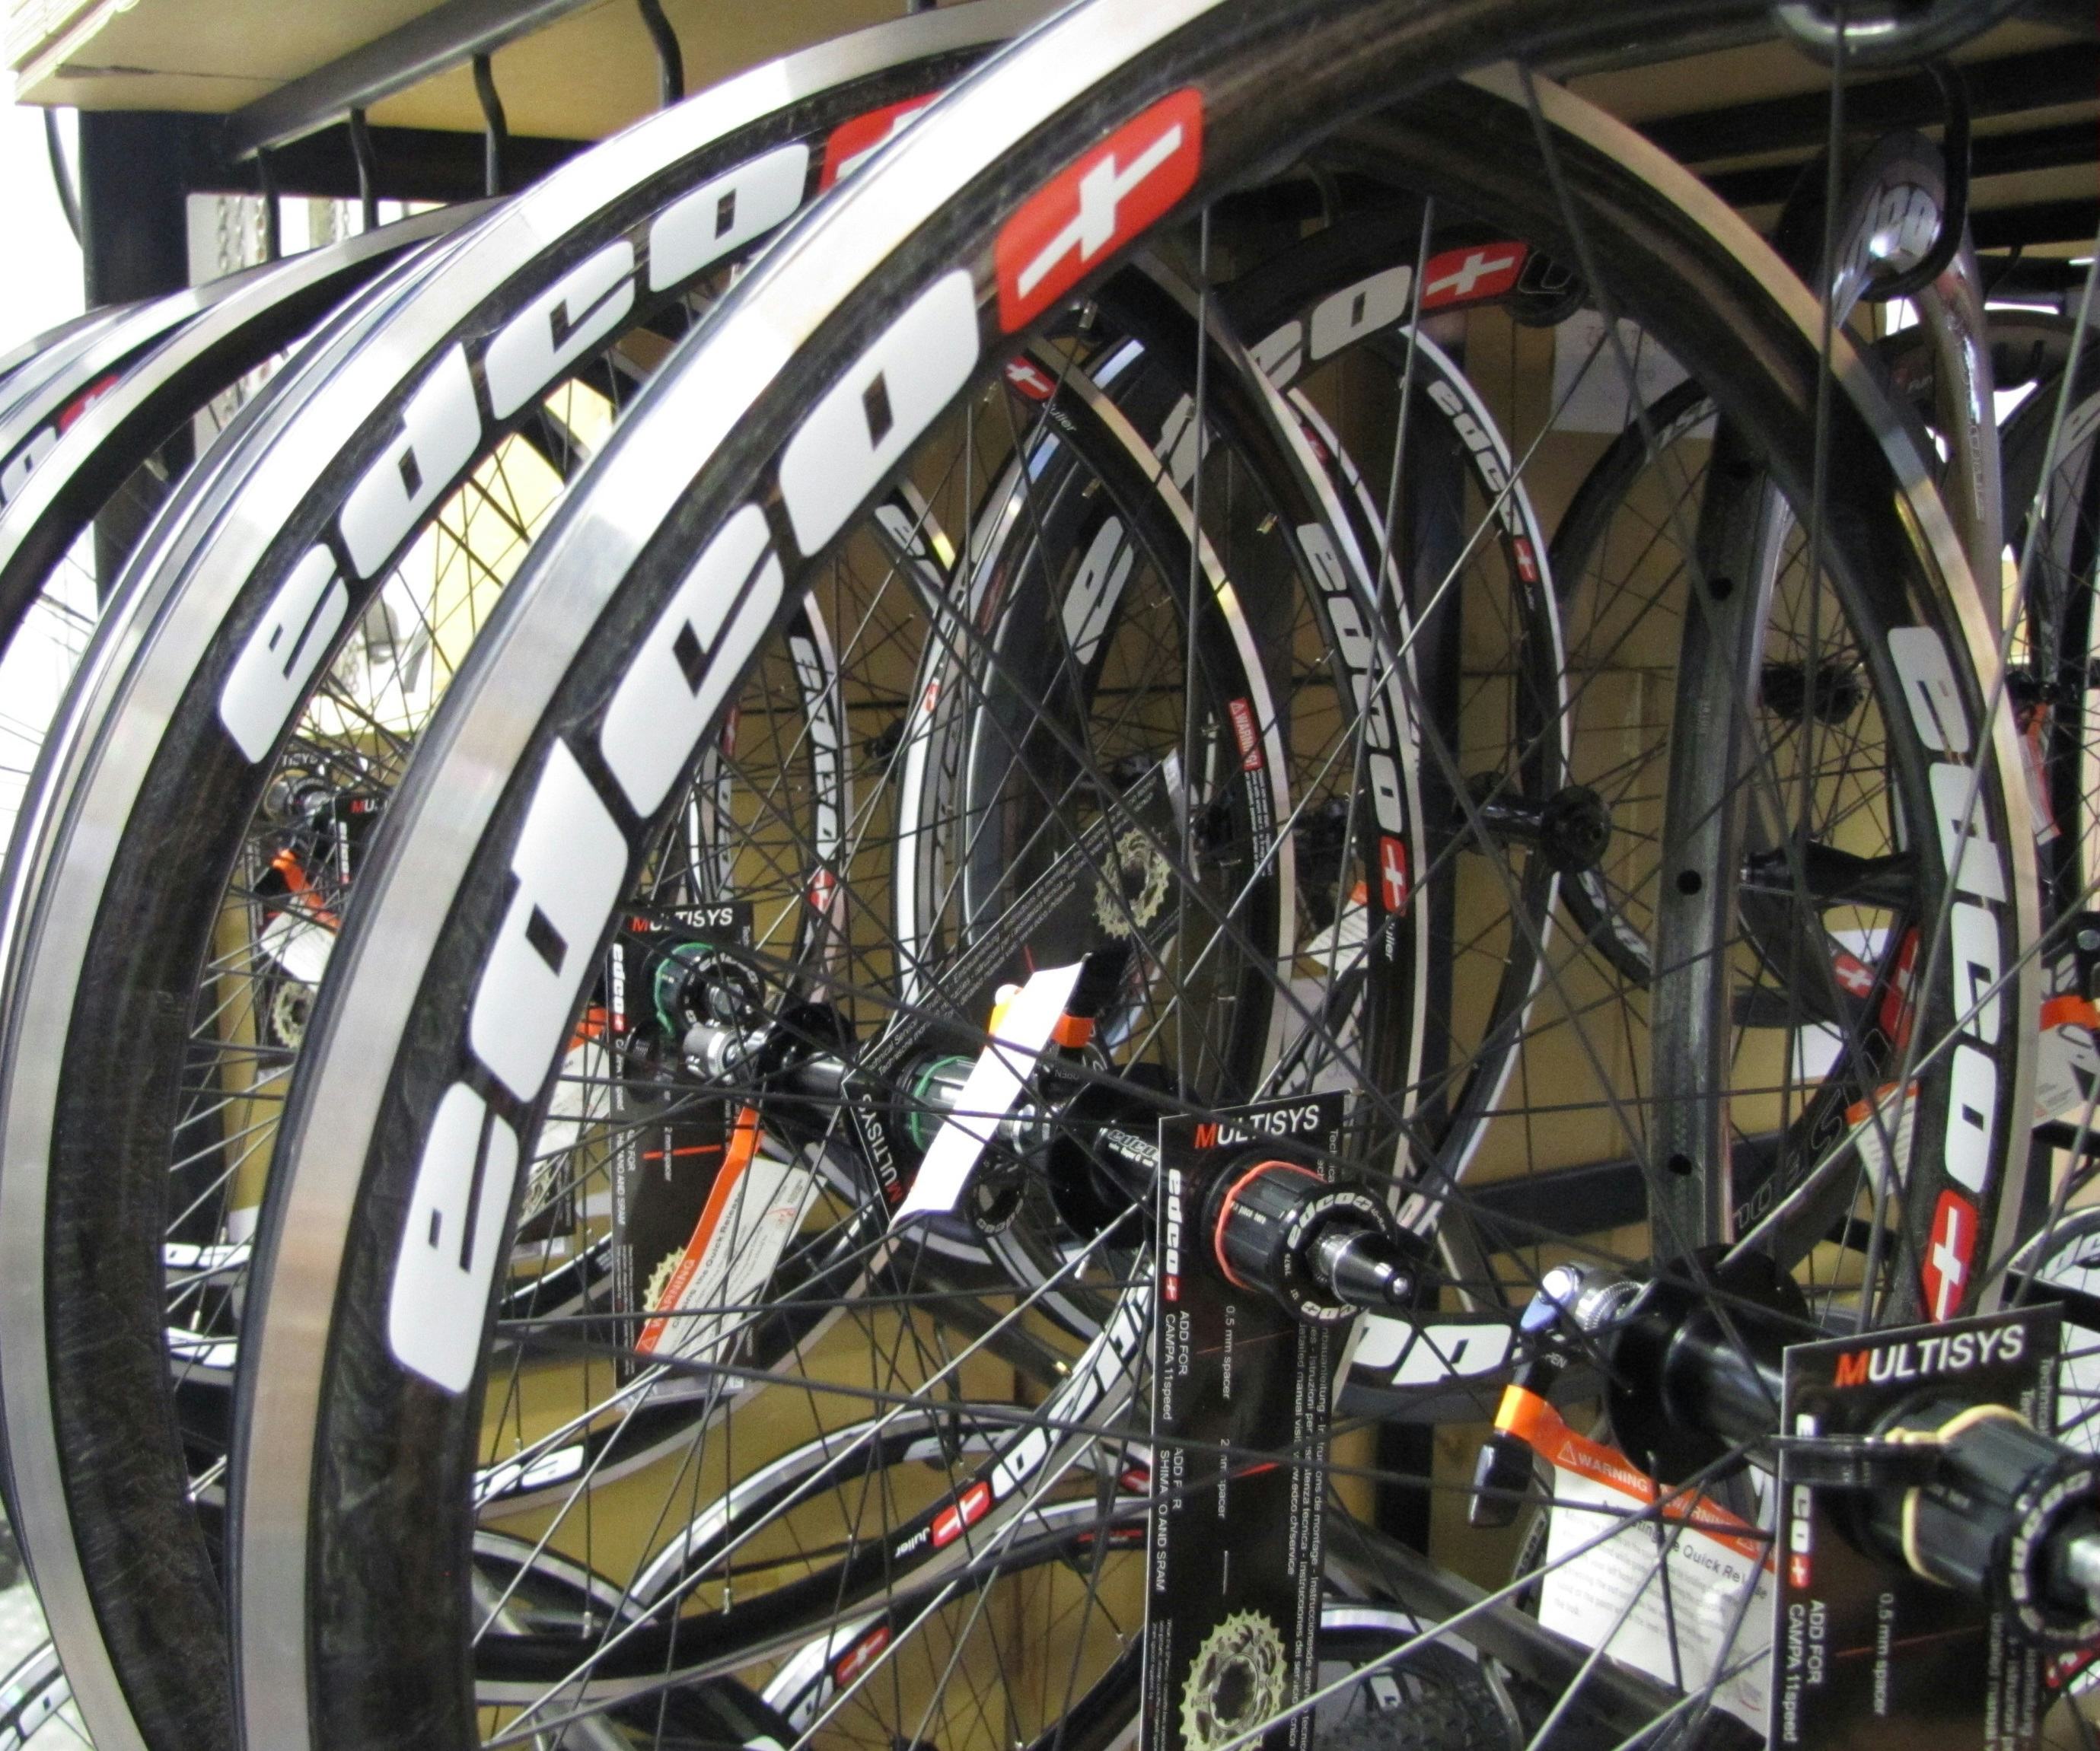 Edco continues to develop and produce high end bicycle components. – Photo Bike Europe